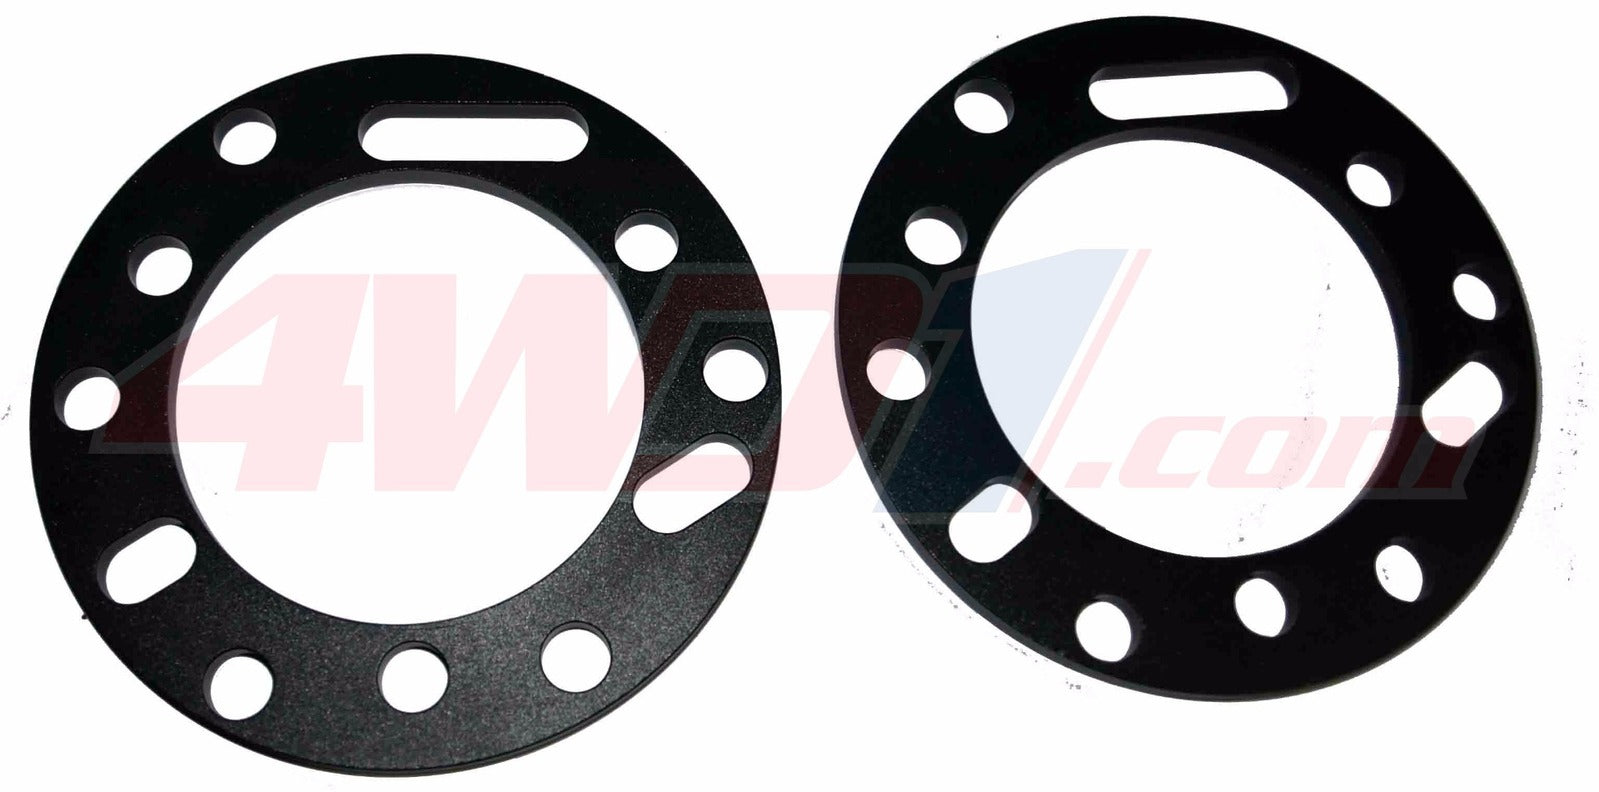 STRUT SPACERS MULTIFIT FOR HOLDEN COLORADO 7 LIFTS 10-12MM (PAIR)